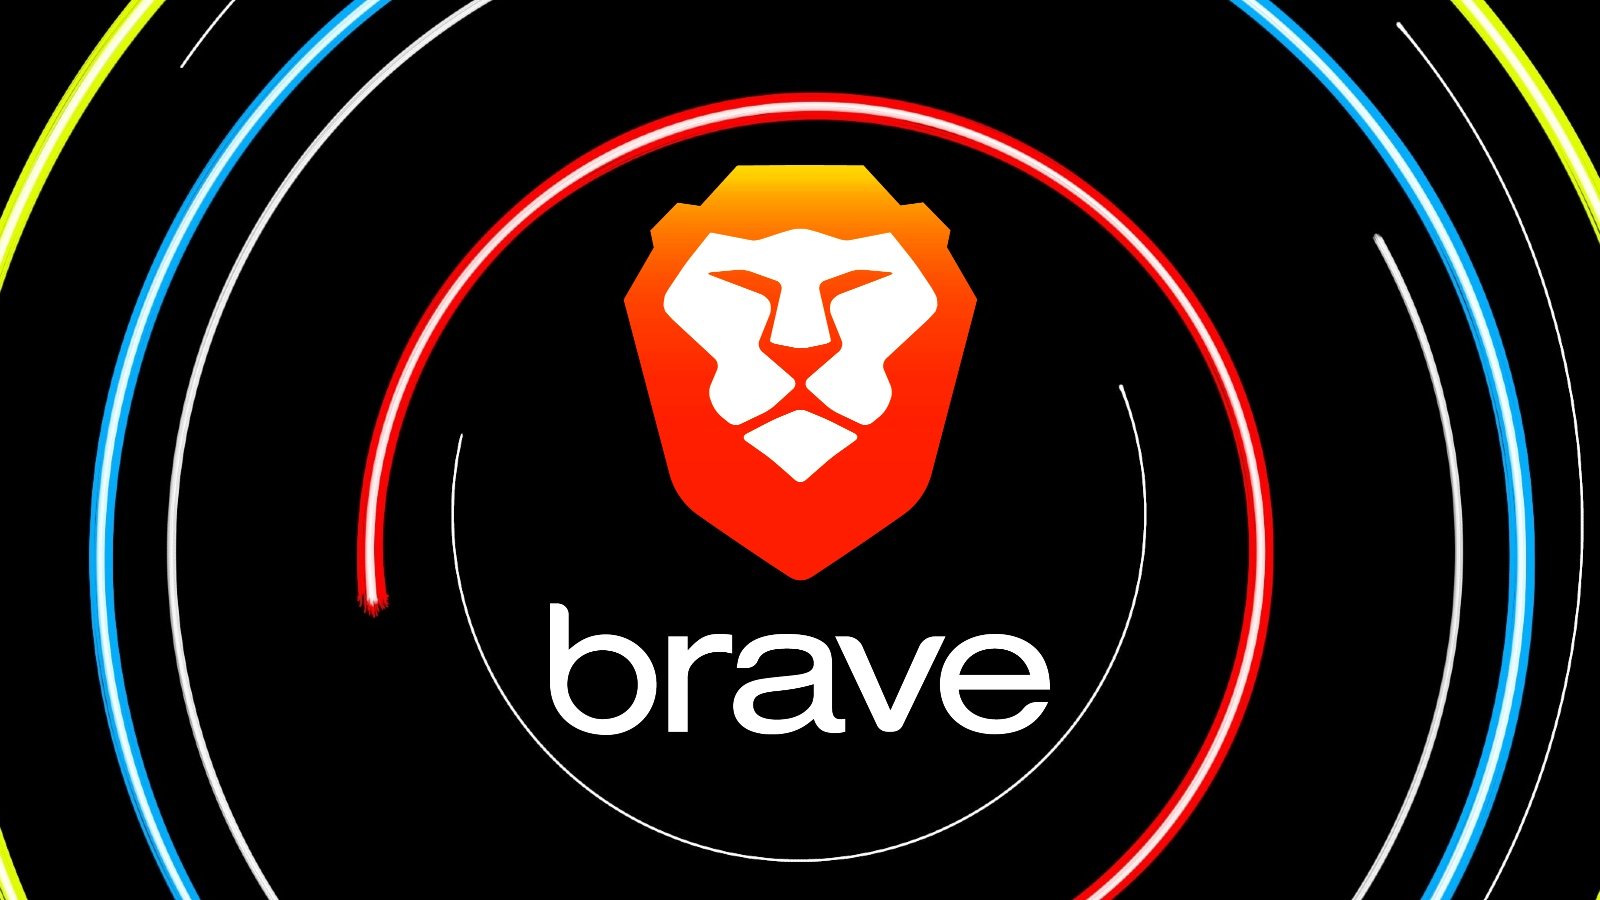 On Android, Brave website introduces a privacy-focused AI assistant.